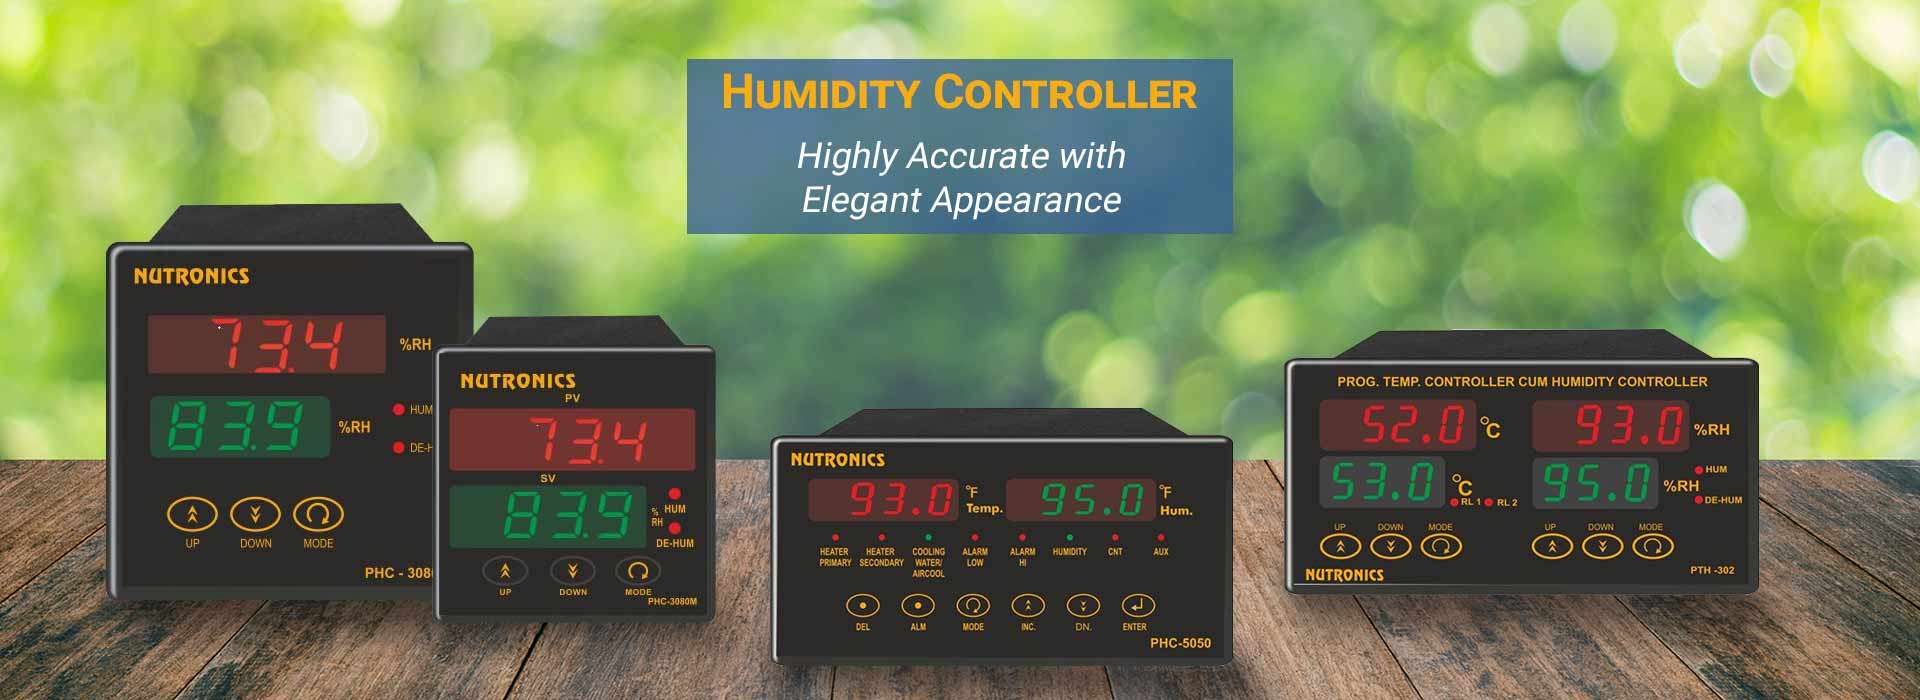  Humidity controller Manufacturers in Ahmedabad